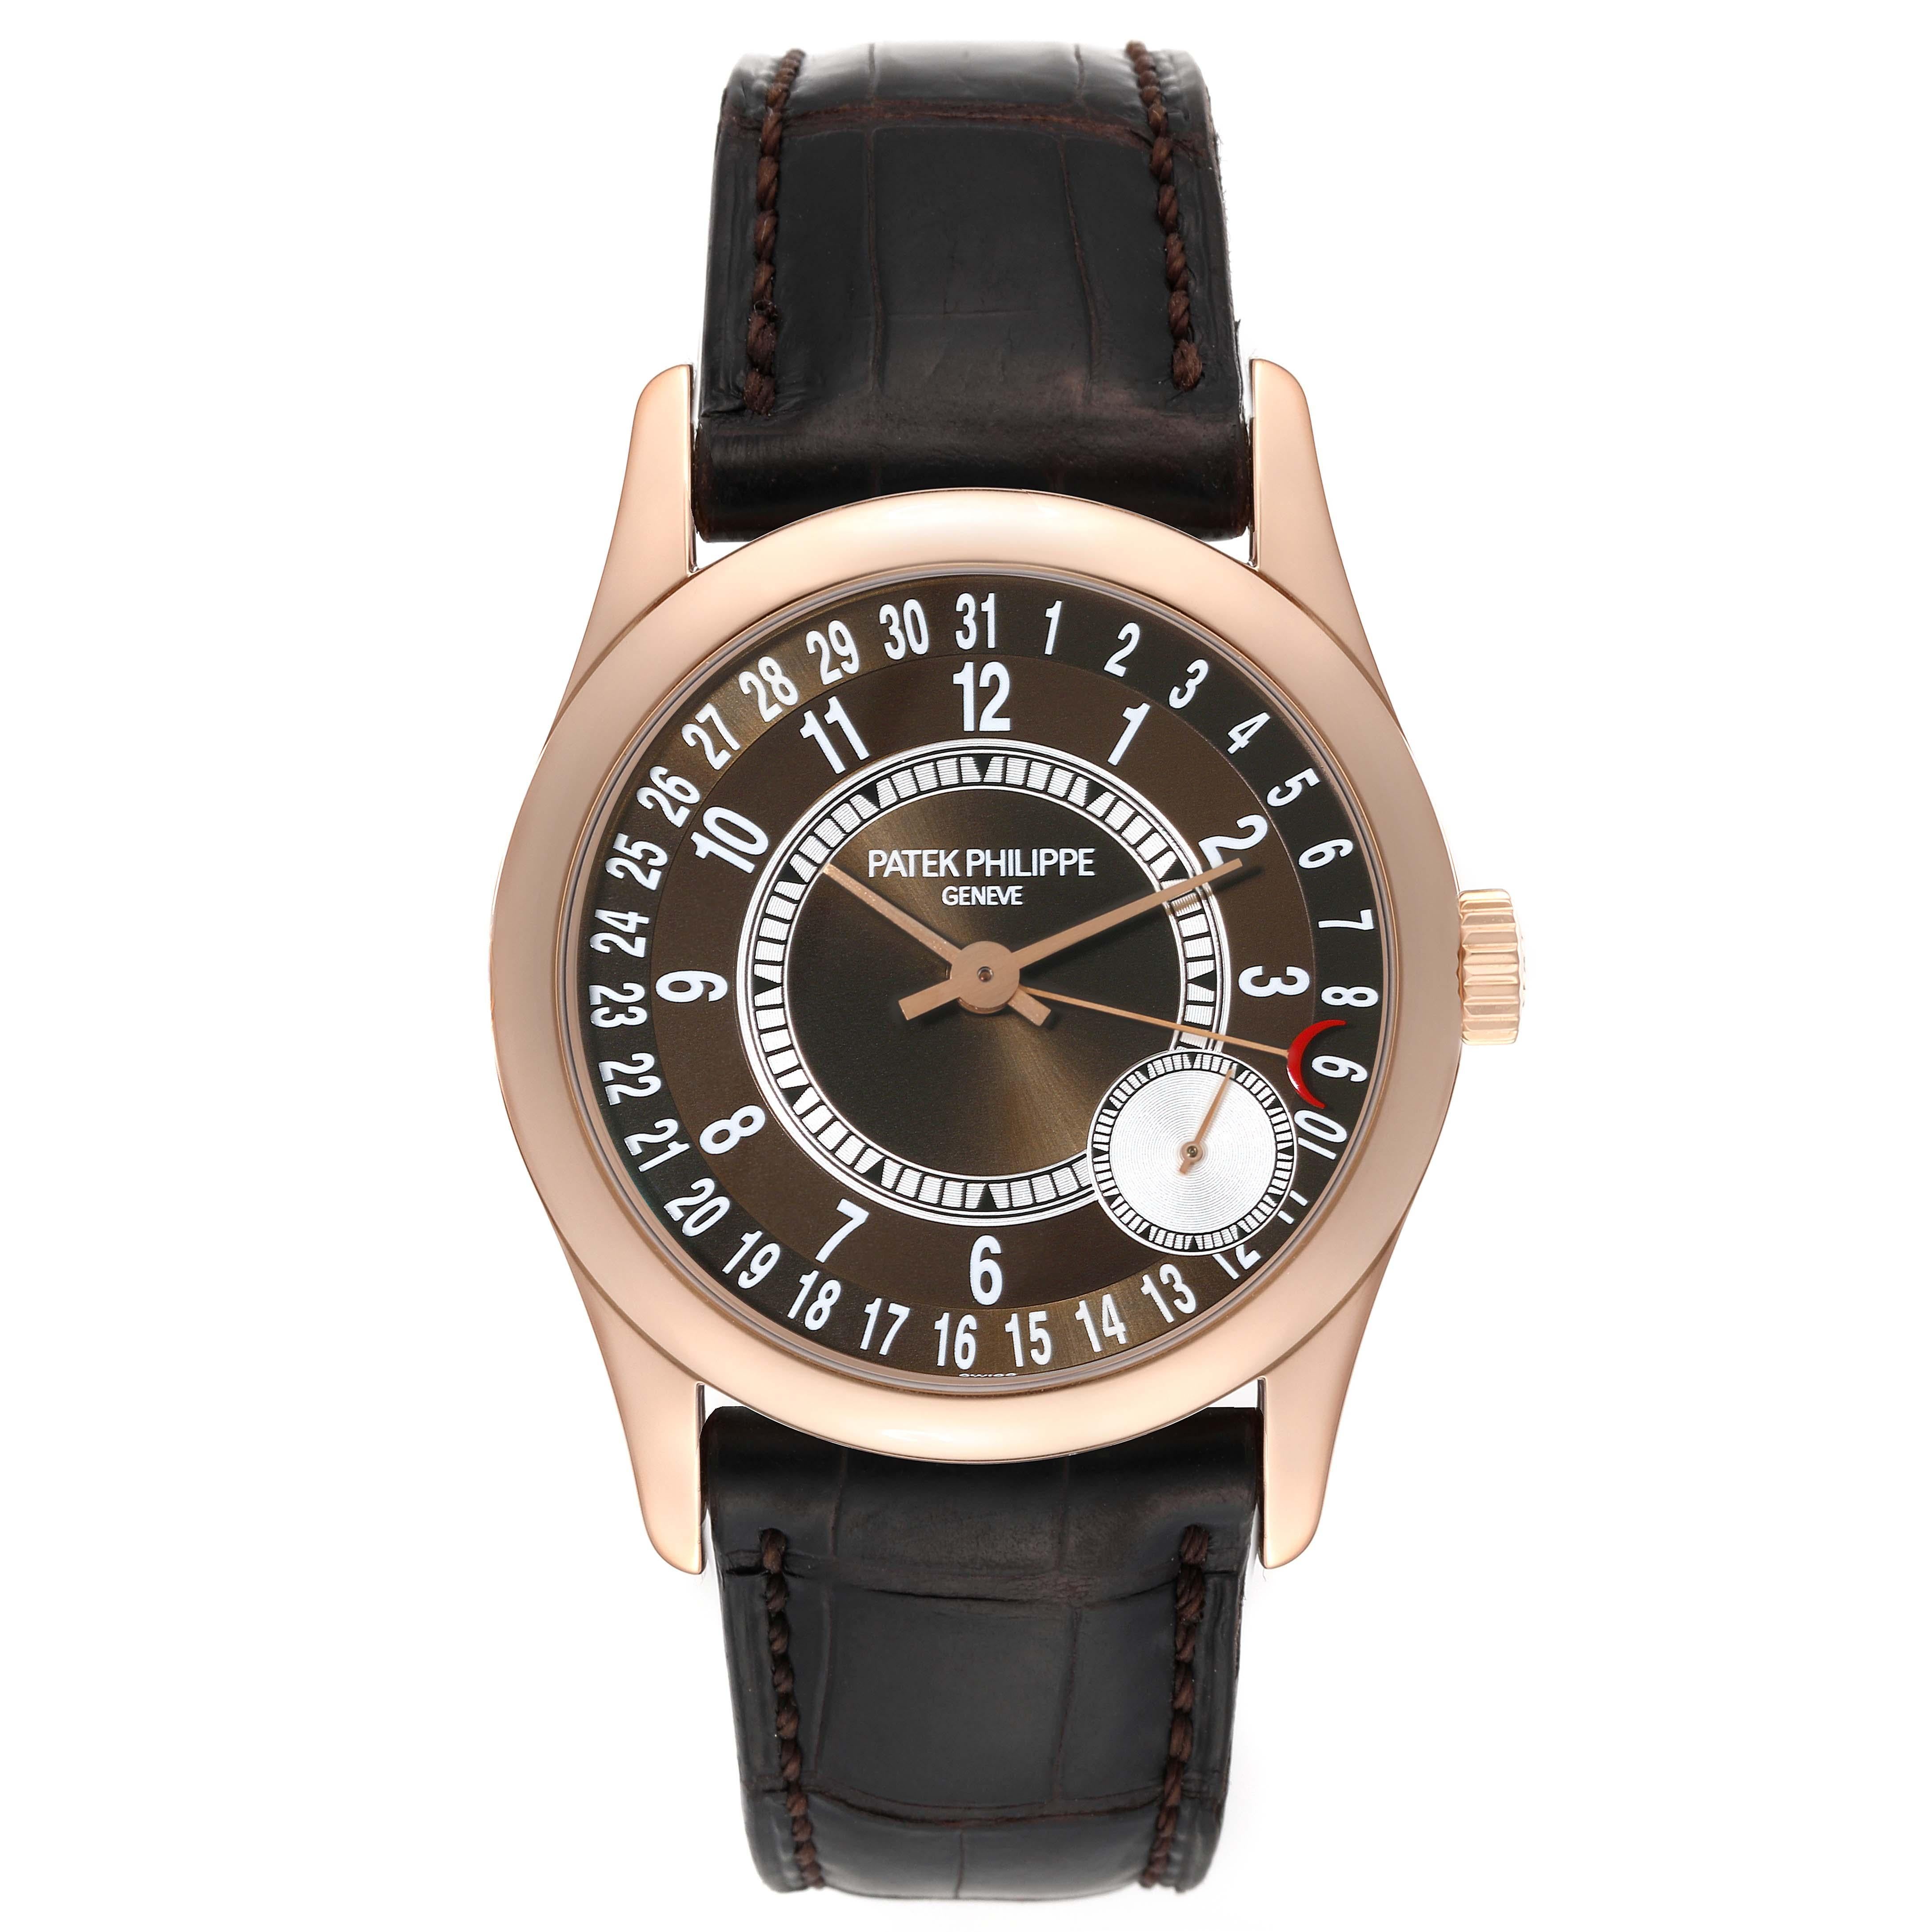 Patek Philippe Calatrava Rose Gold Brown Dial Mens Watch 6000 Papers. Automatic self-winding movement with gold micro-rotor, adjusted to heat, cold, isochronism and 5 positions, Seal of Geneva. 18k rose gold case 37.0 mm in diameter. Transparent